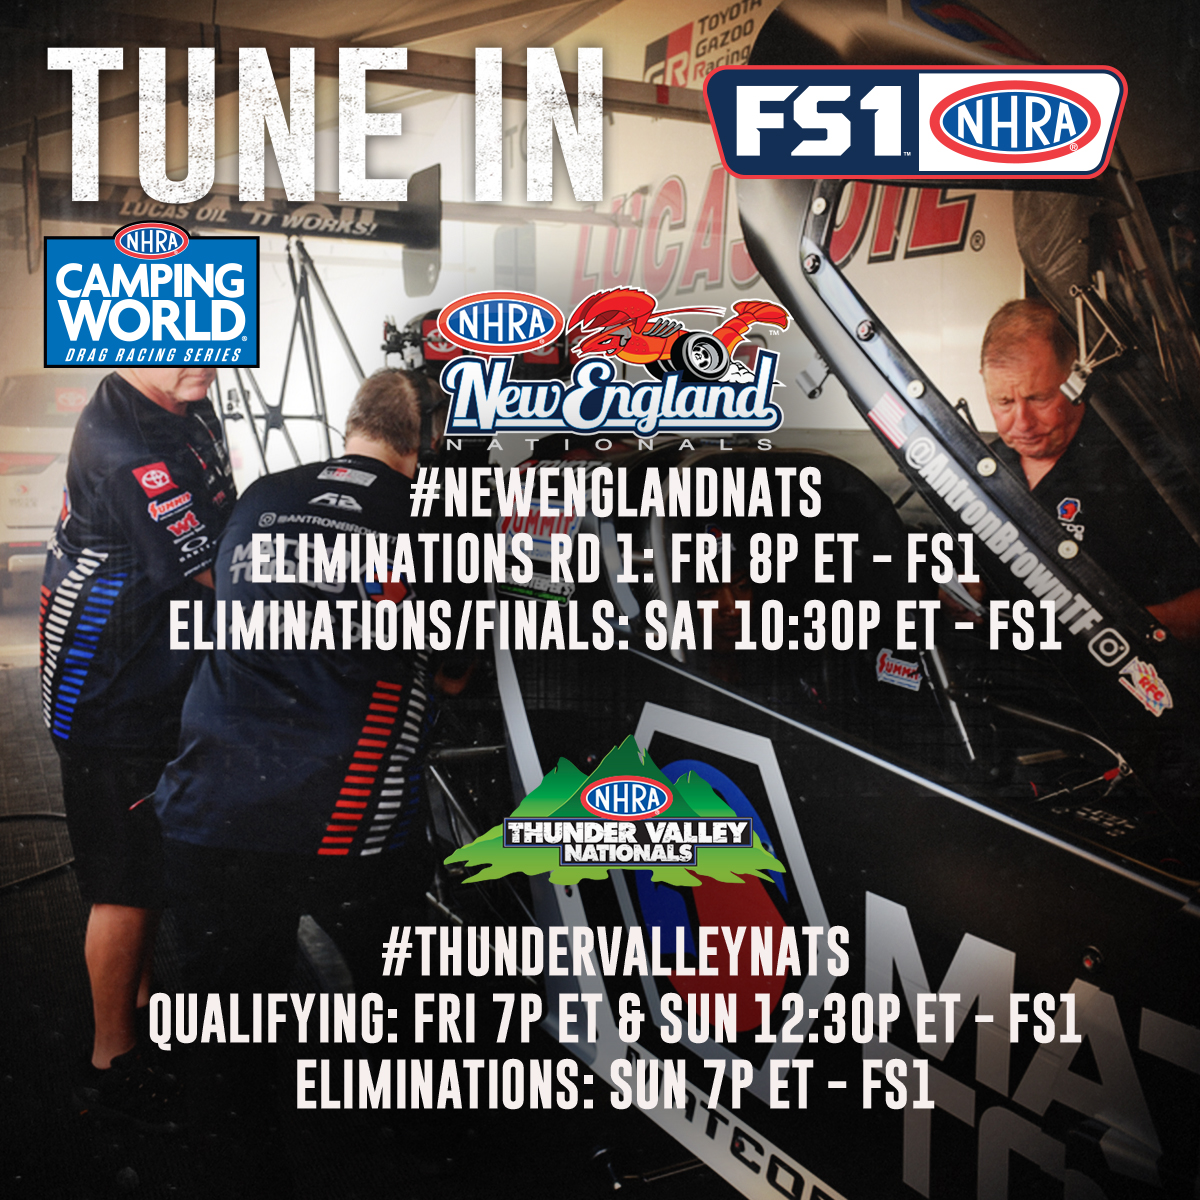 You're not going to want to miss this weekend's action! 2 chances to win means double the fun. TUNE IN with #NHRAonFOX!

@matcotools / @ToyotaRacing / @Hangsterfers / @SIRIUSXM / @SummitRacing / @FVPparts